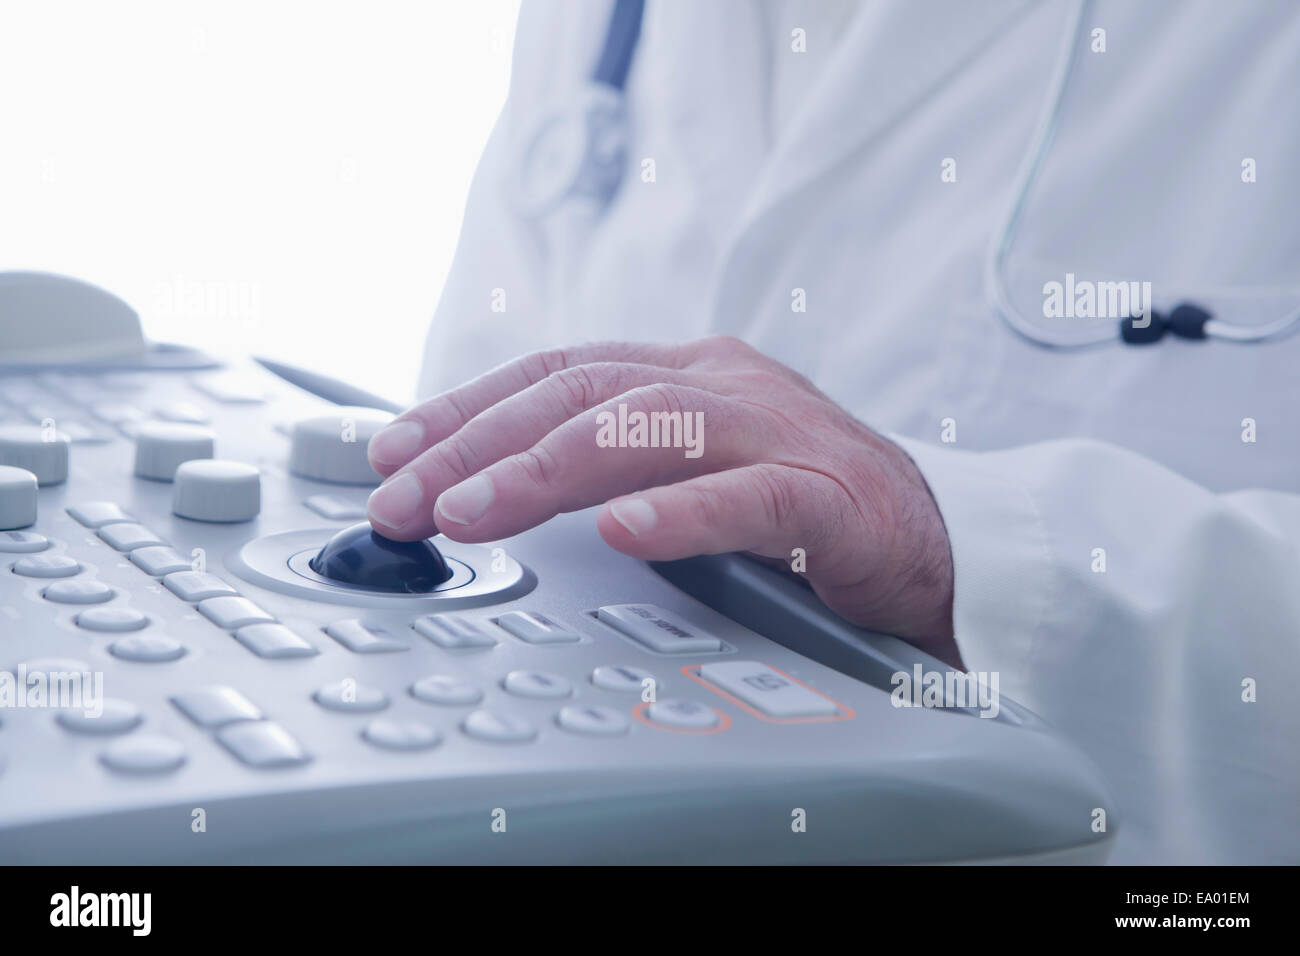 Doctor operating ultrasound scanner Stock Photo